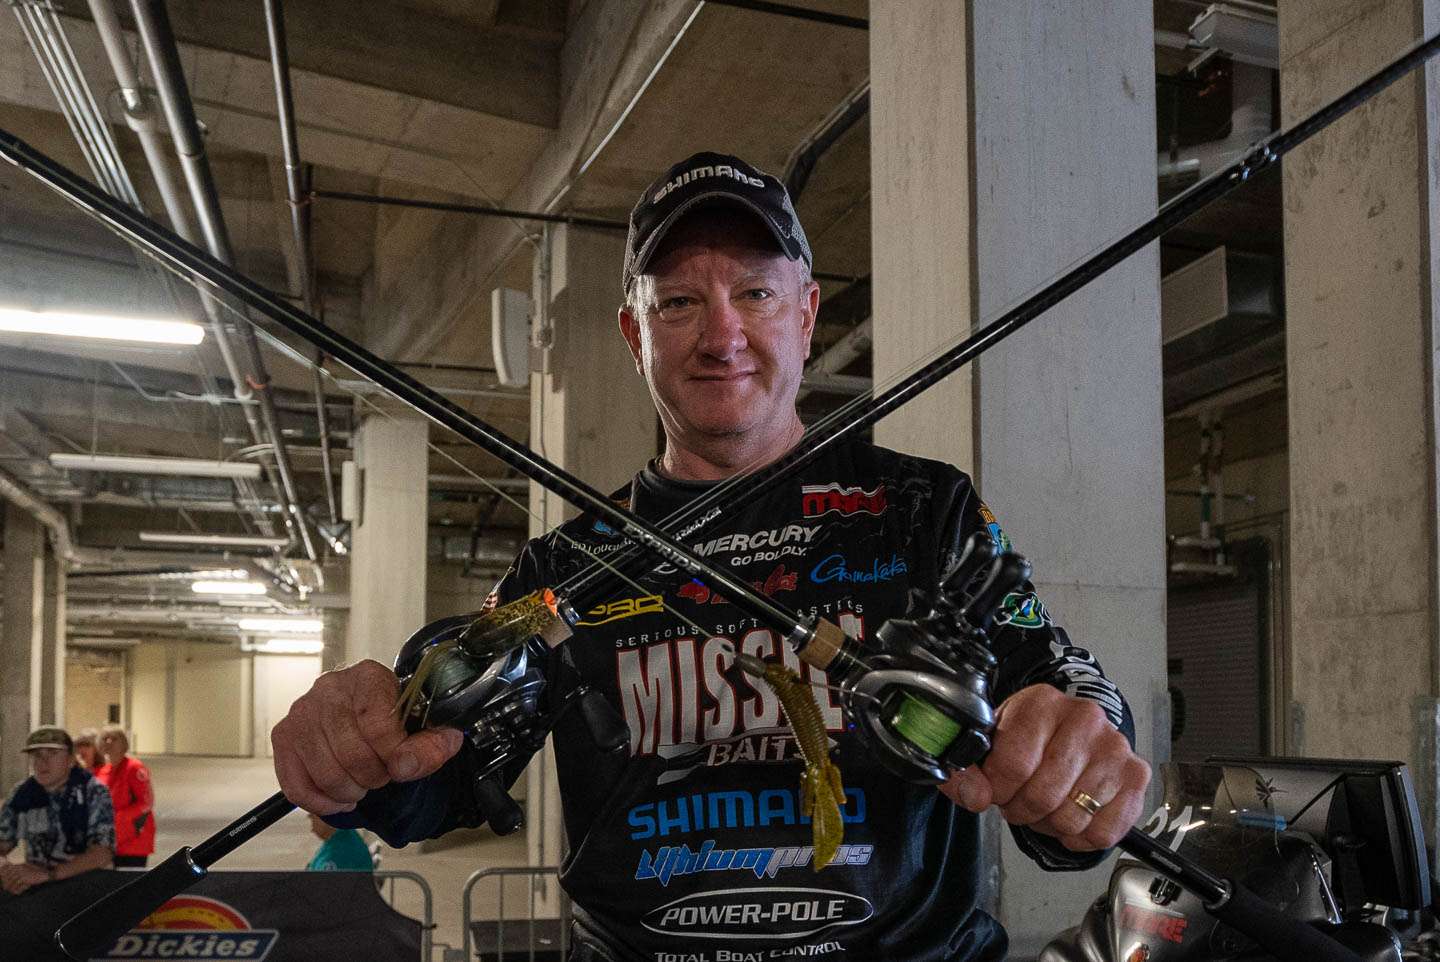 <b>Ed Loughran (12th; 36-7)</b><br>
Ed Loughran doubled up with a Texas-rigged Missile Baits D Bomb, with a Gamakatsu Heavy Cover Worm Hook and a 3/8-ounce weight. 